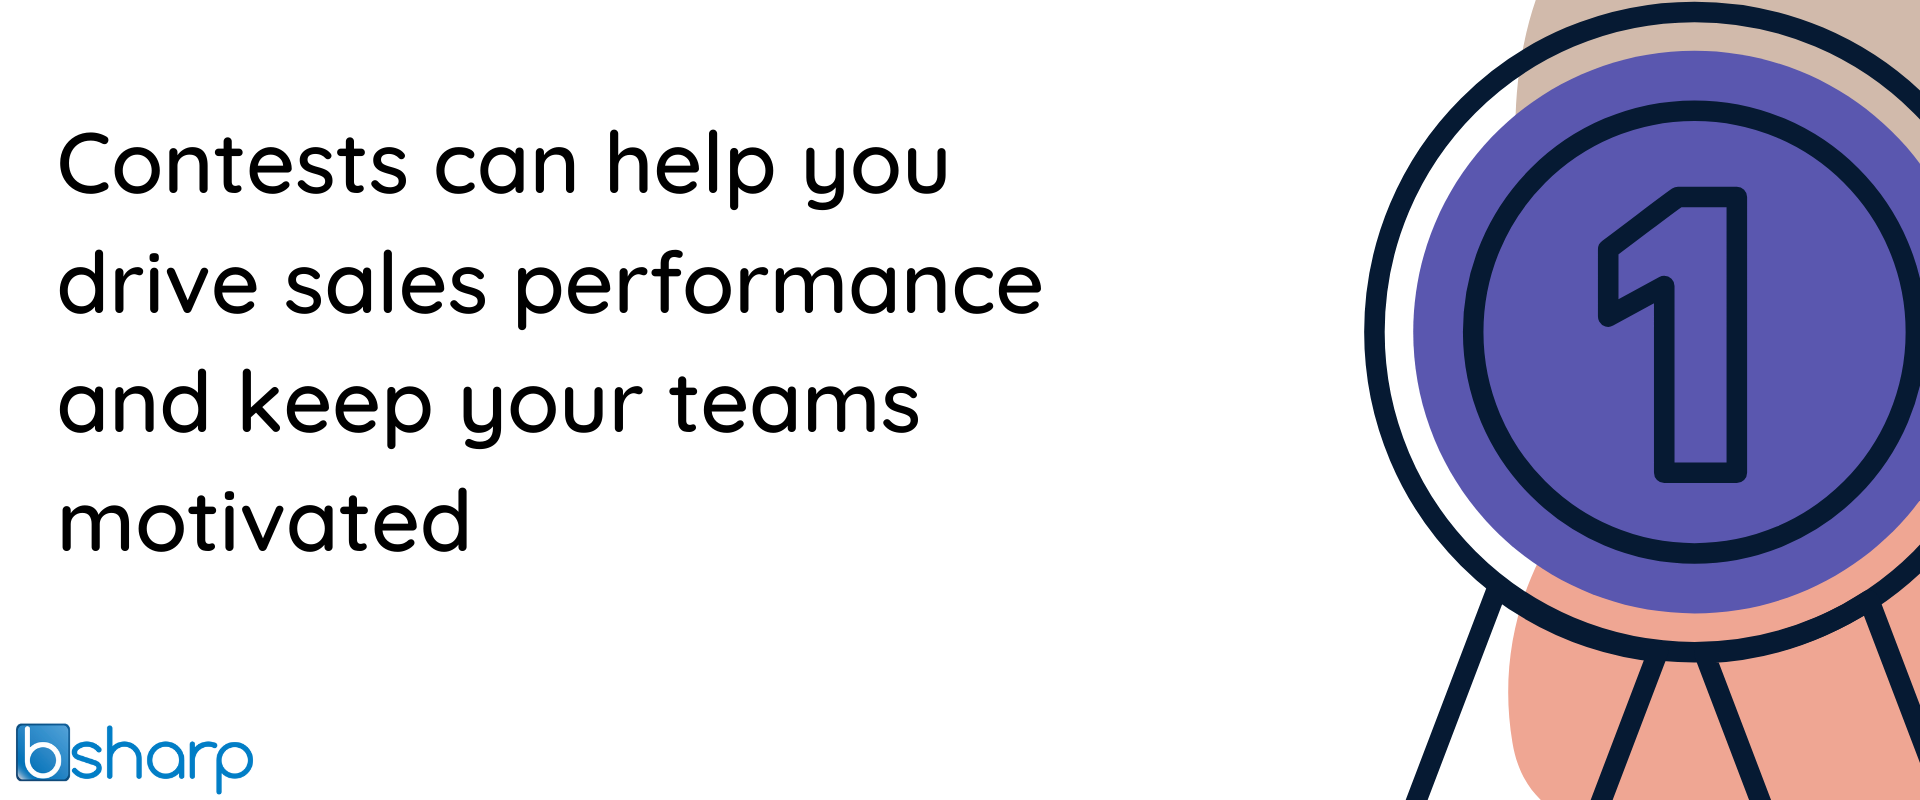 Contests can help you drive sales performance and keep your teams motivated